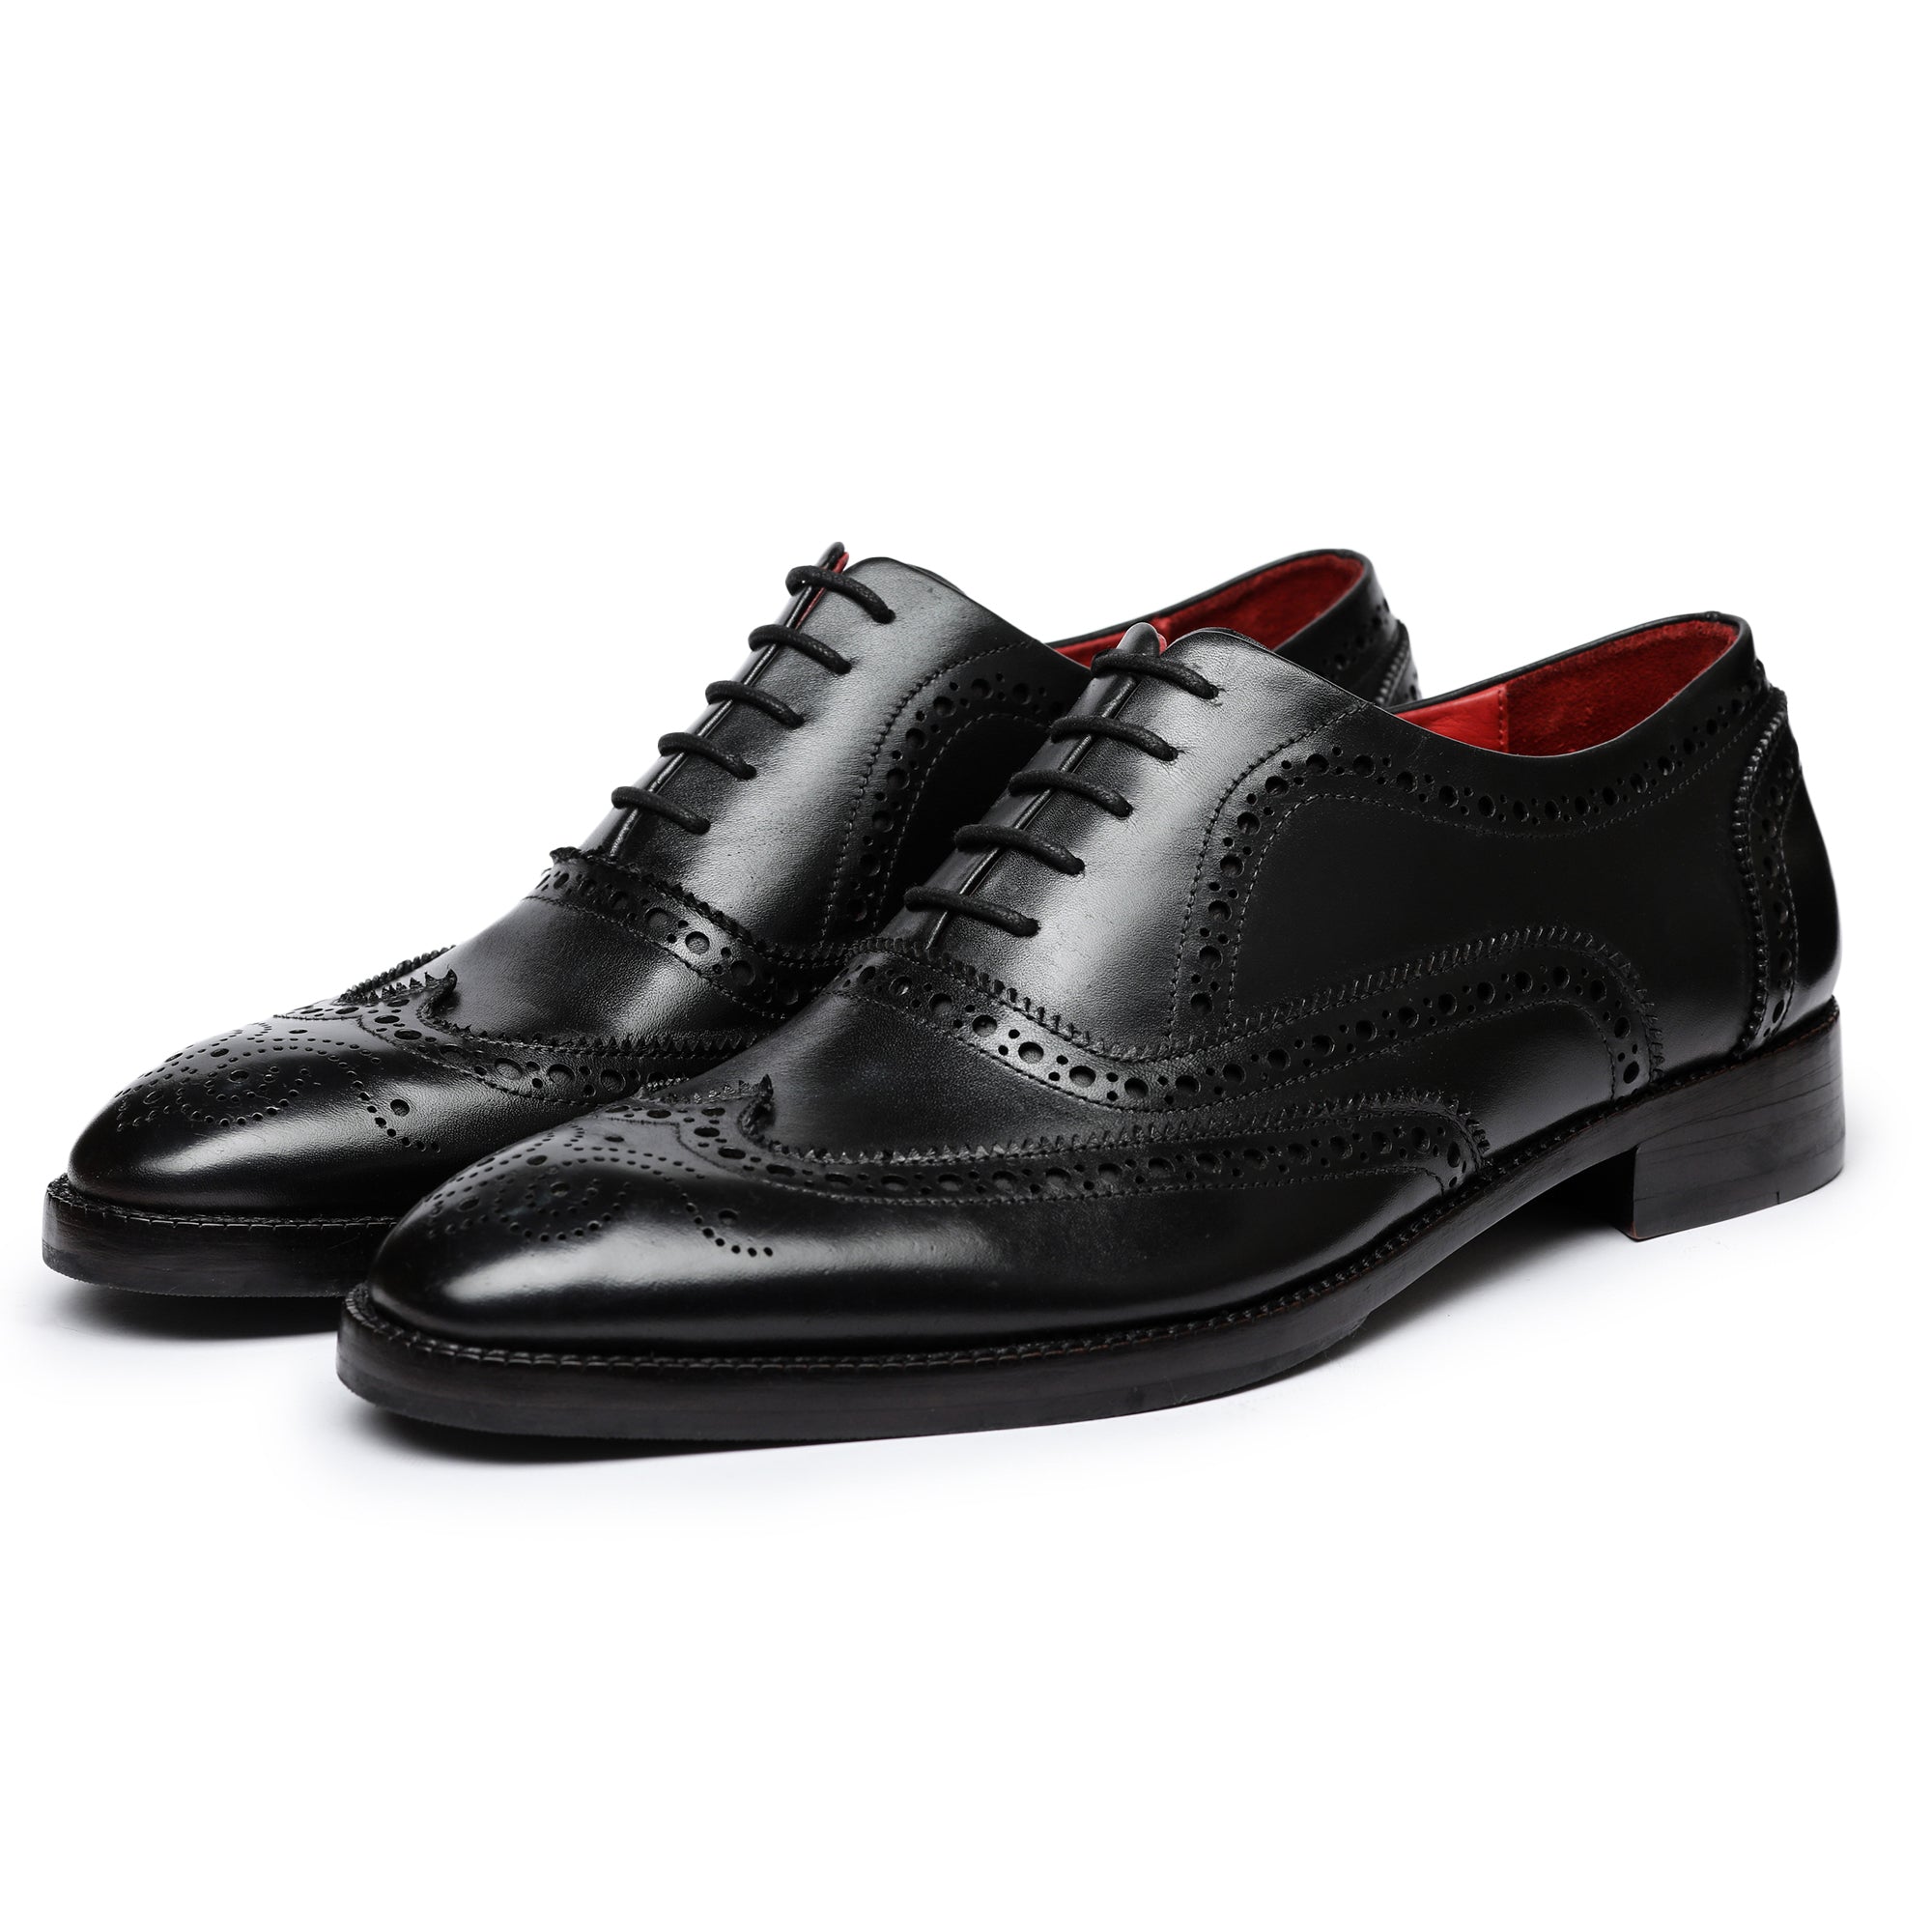 Mens Black & Red Leather Wingtip Dress Shoes - Size 11 – m